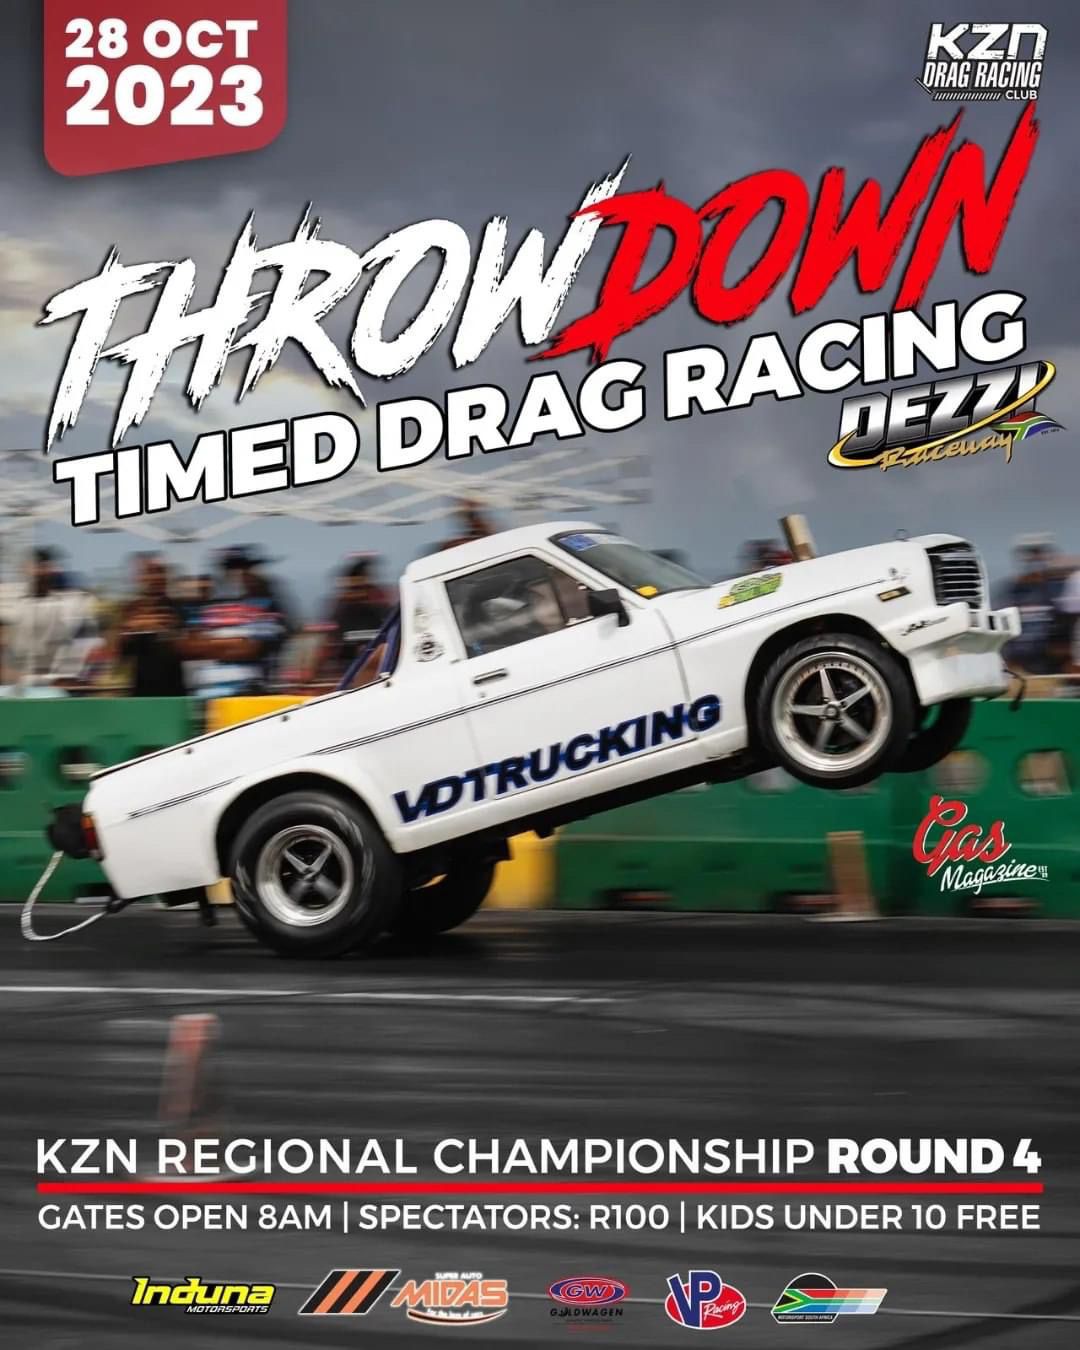 Throw down Regional Championship Round 4 -Timed Drag racing